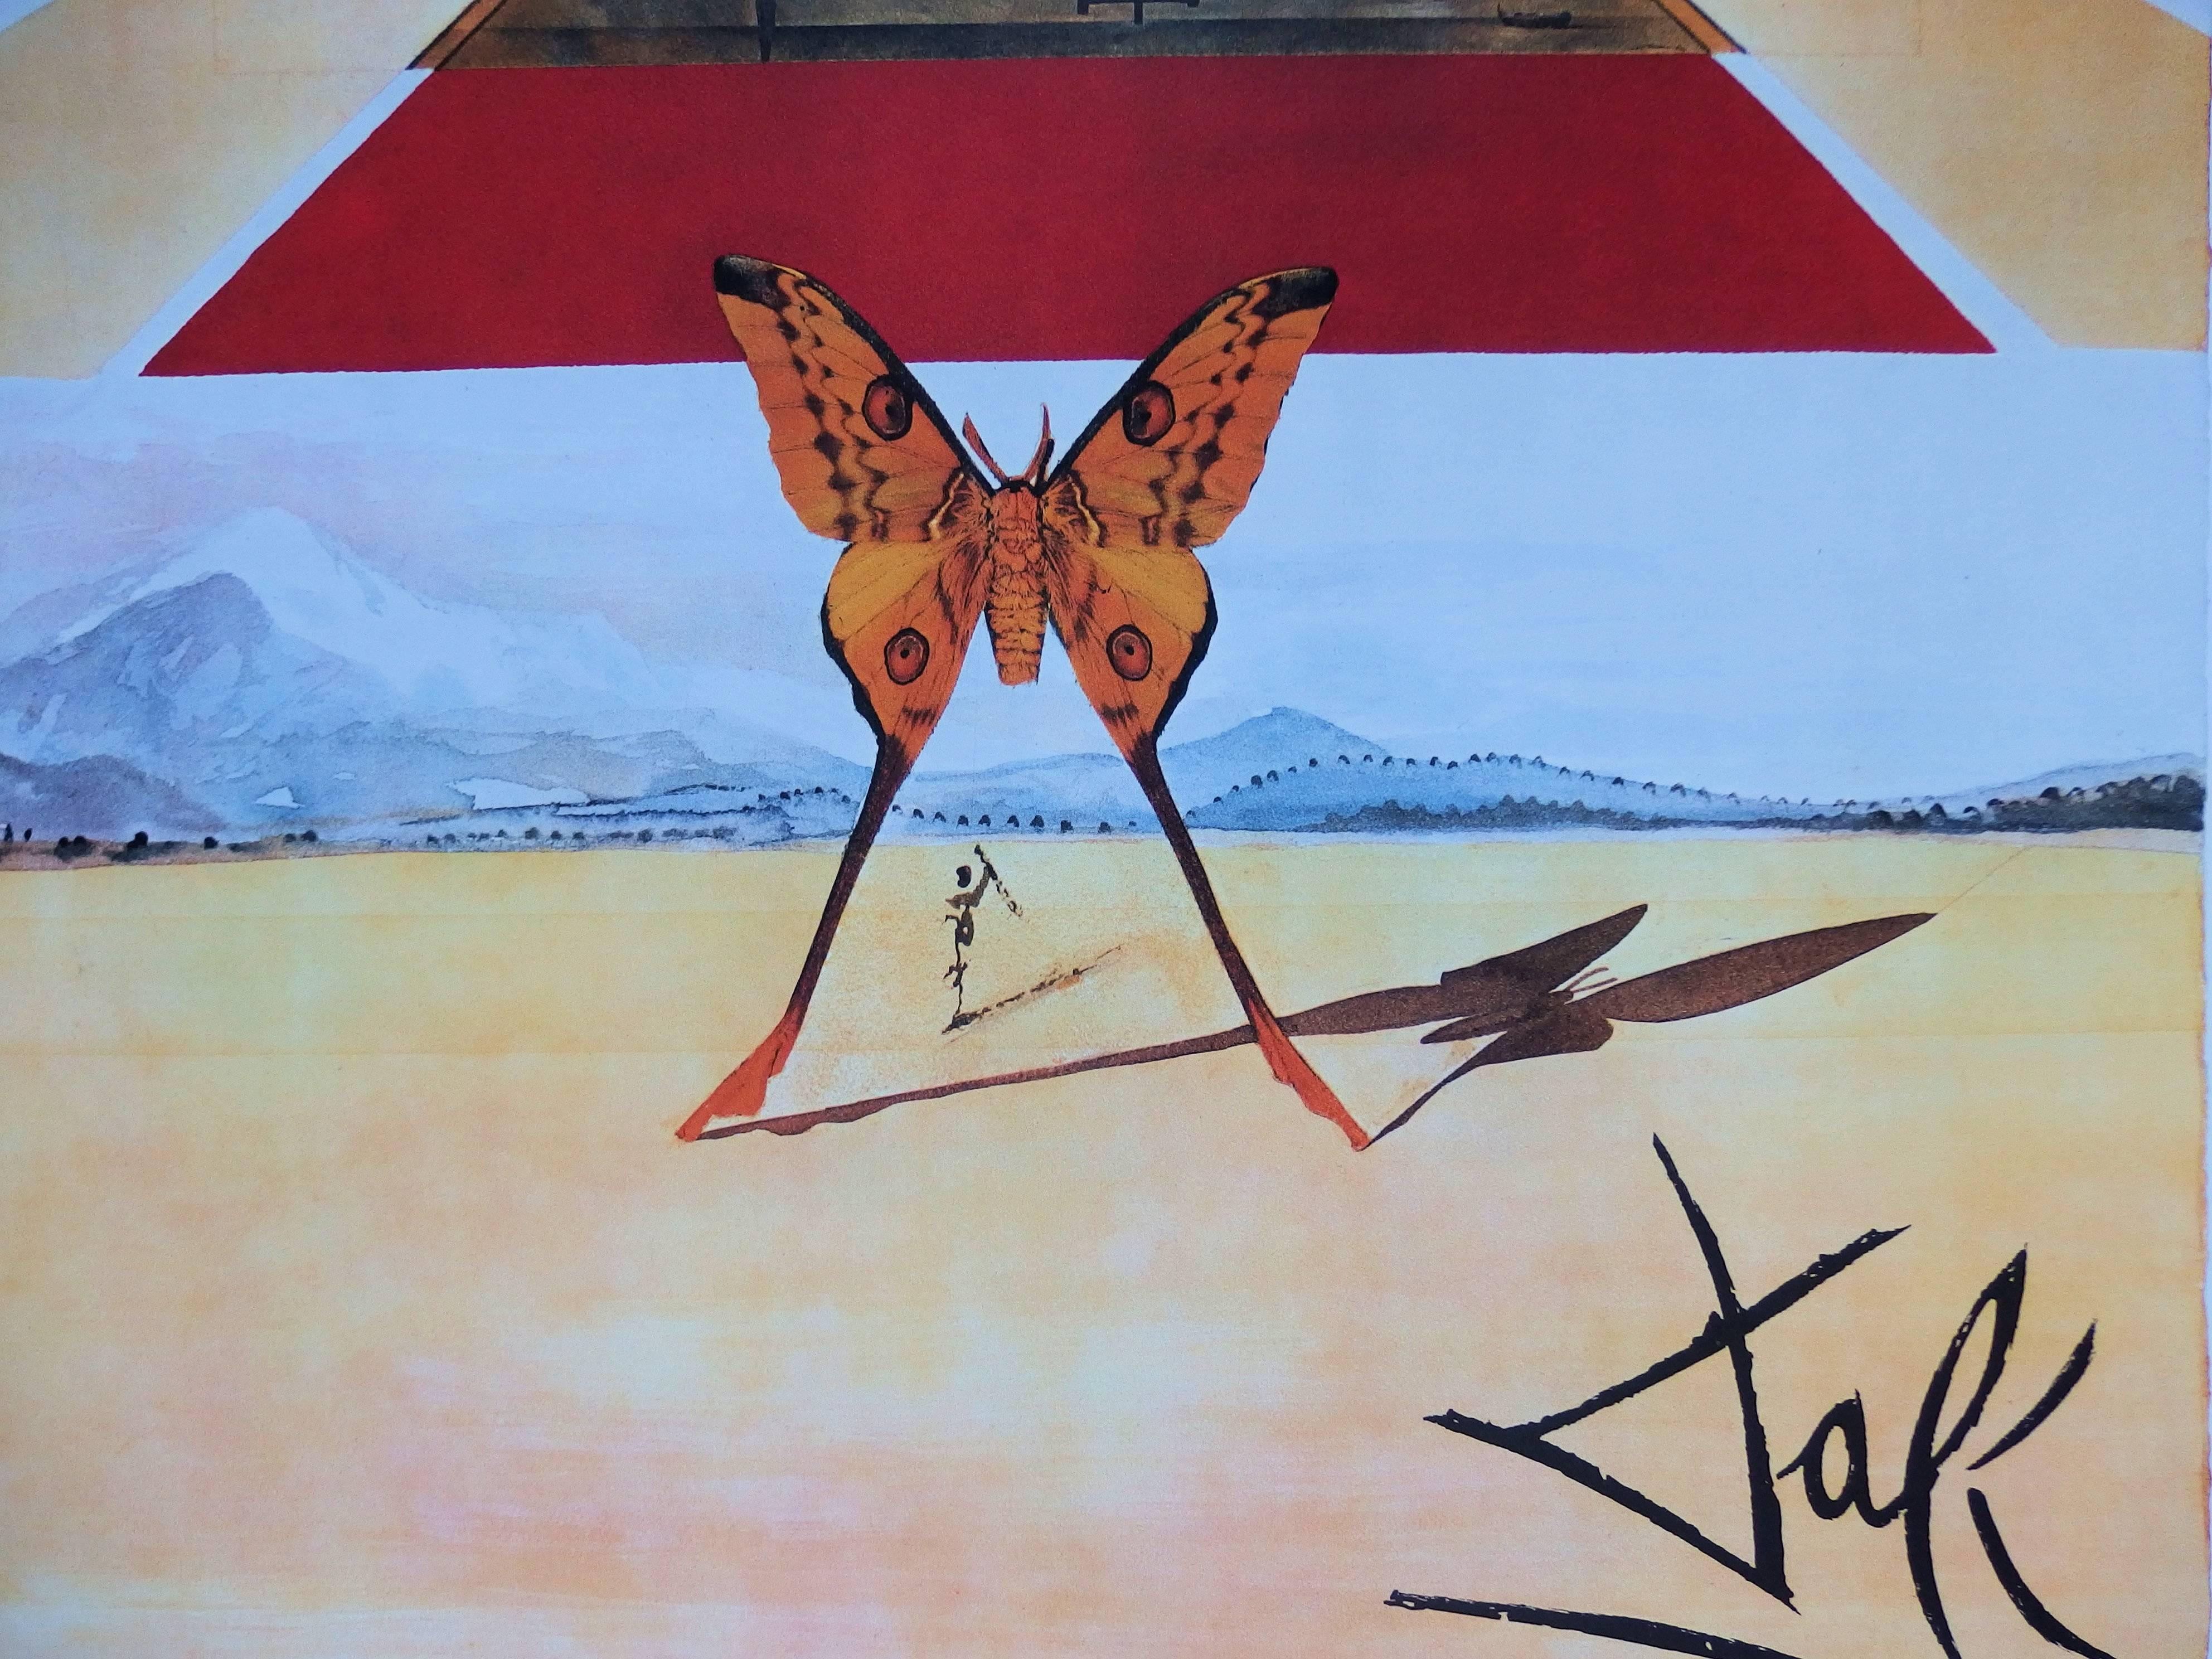 Butterfly suite : Roussillon - Original lithograph - Tall size, 1969 - Print by (after) Salvador Dali